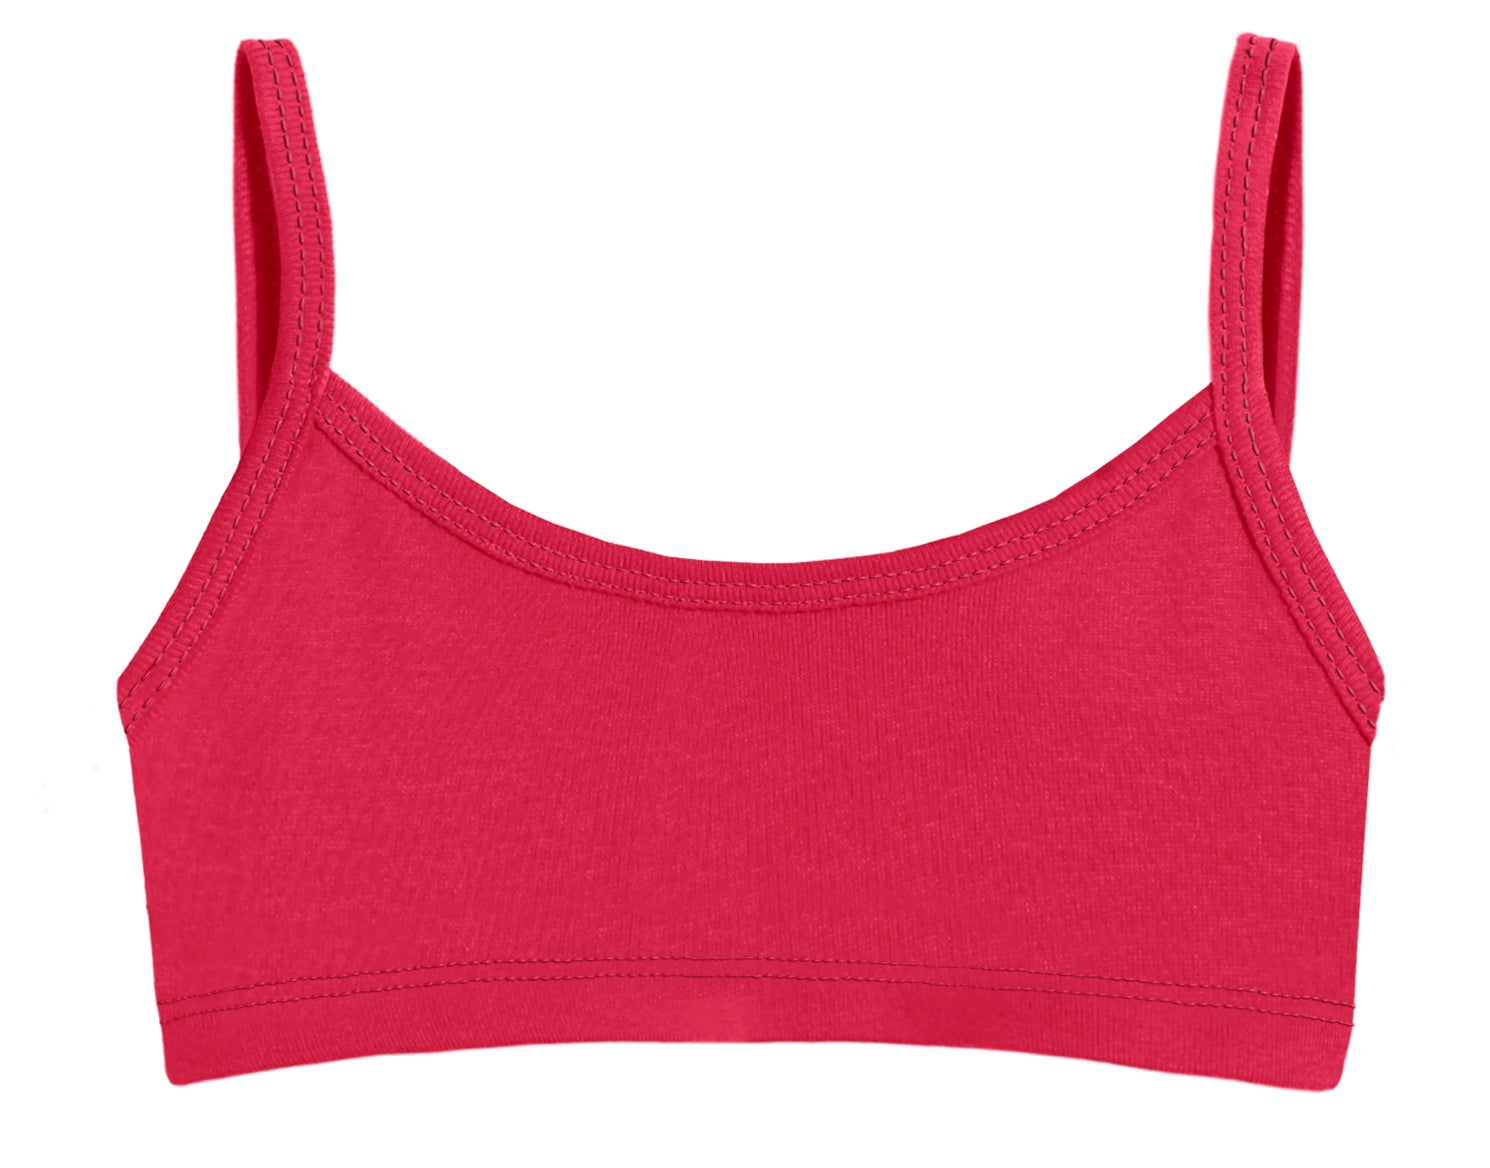 Kids Girls Training Bras Quality Lycra Cotton Pink Letters